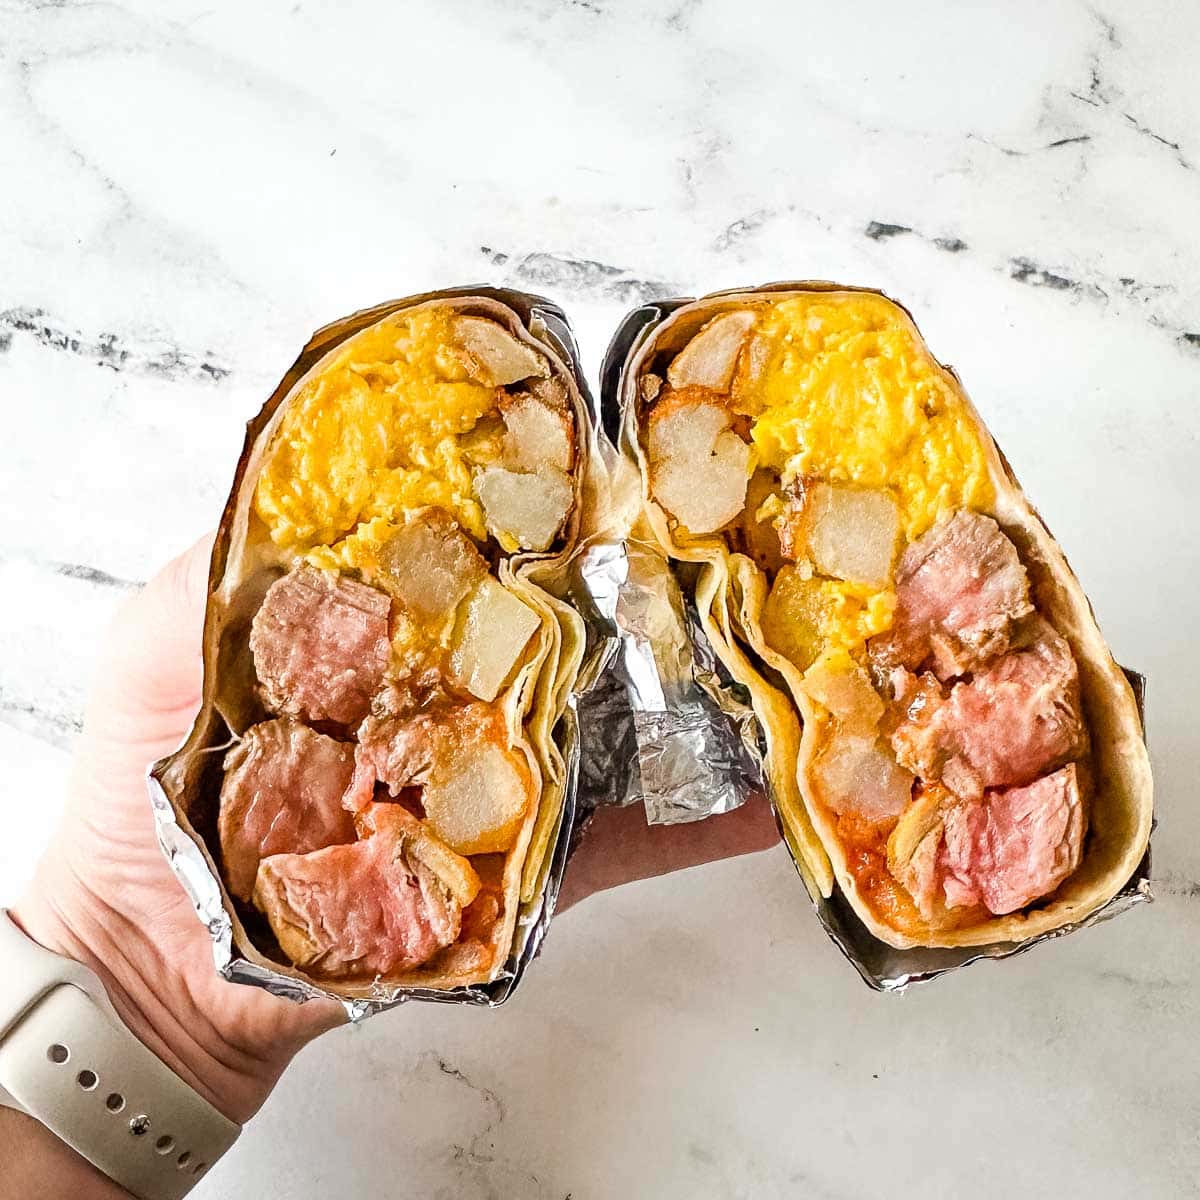 Carne asada burrito that is wrapped in foil and cut in half to expose the center of the burrito.